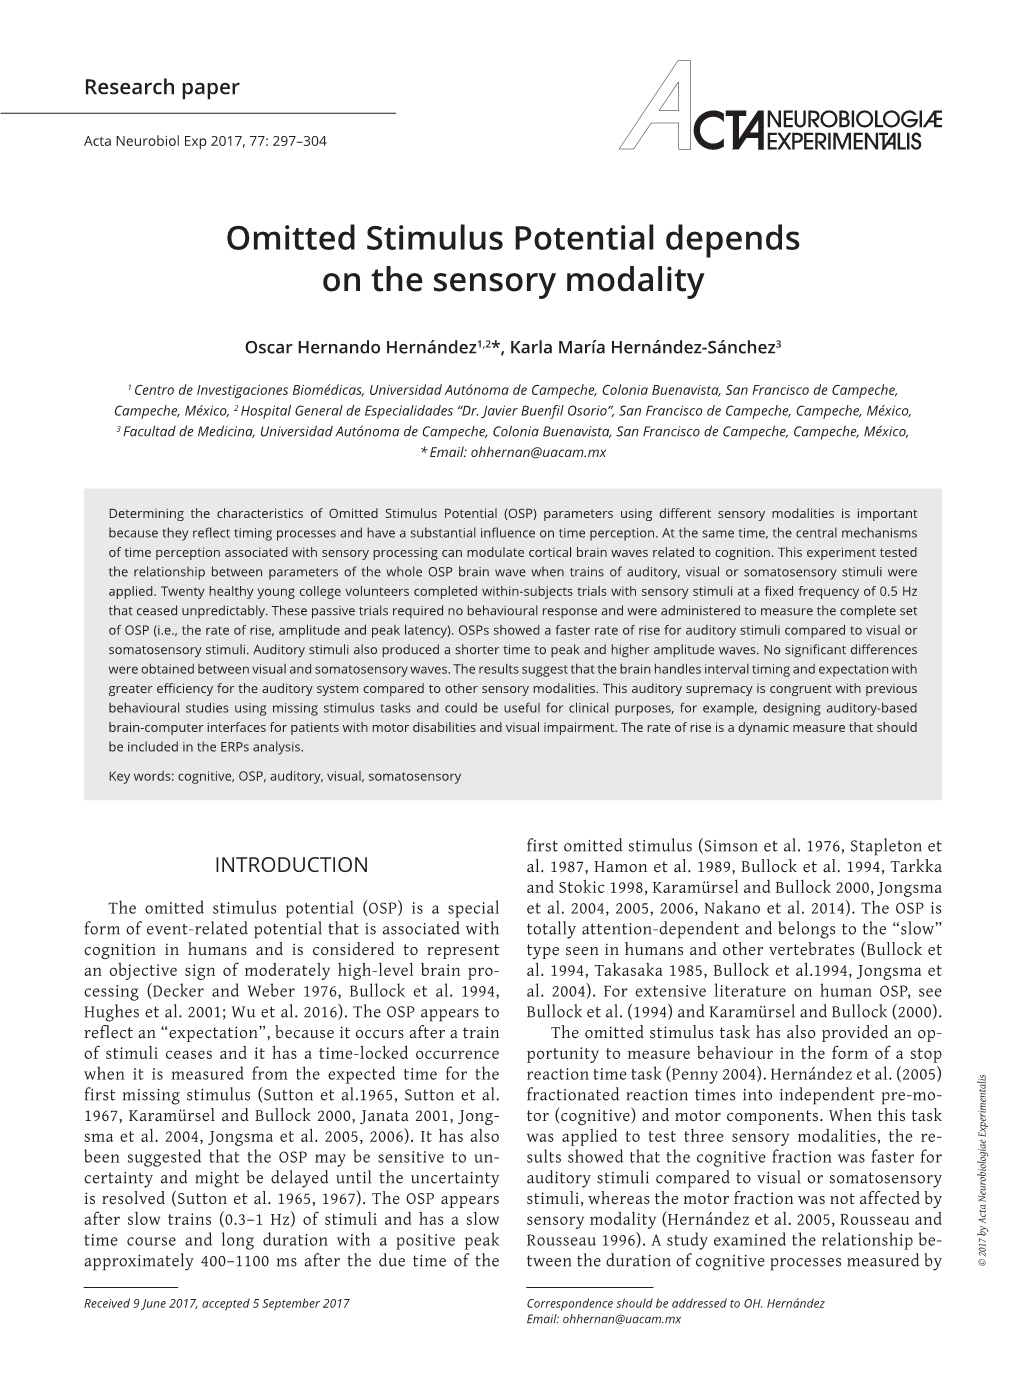 Omitted Stimulus Potential Depends on the Sensory Modality